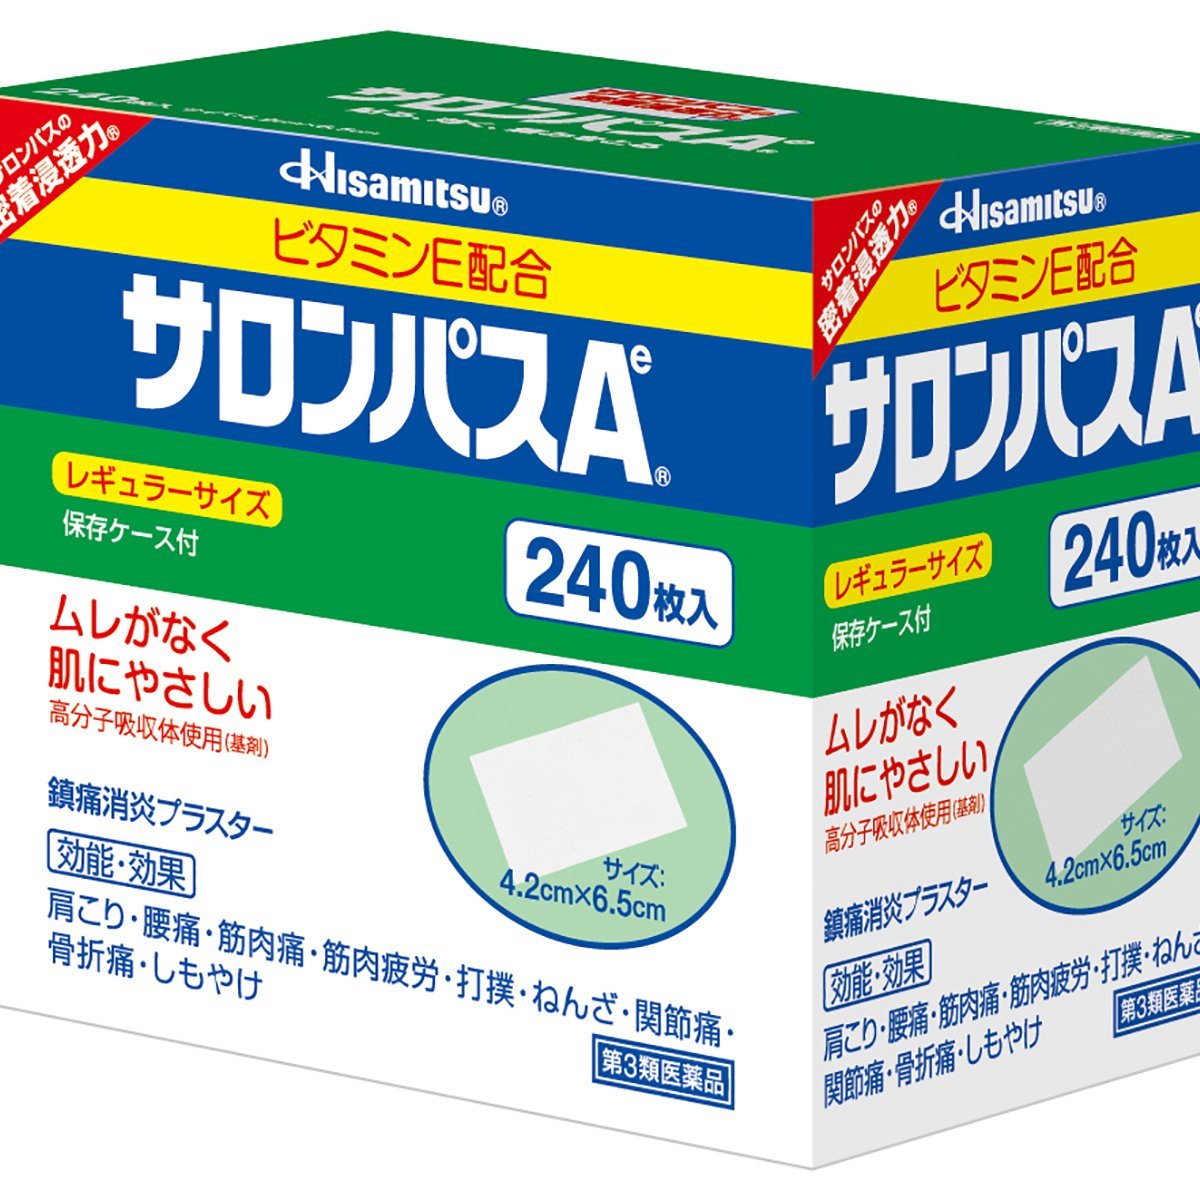 Salonpas Pain Relief Patche Regular 6.5cm x 4.2cm 240 pieces - Harajuku Culture Japan - Japanease Products Store Beauty and Stationery